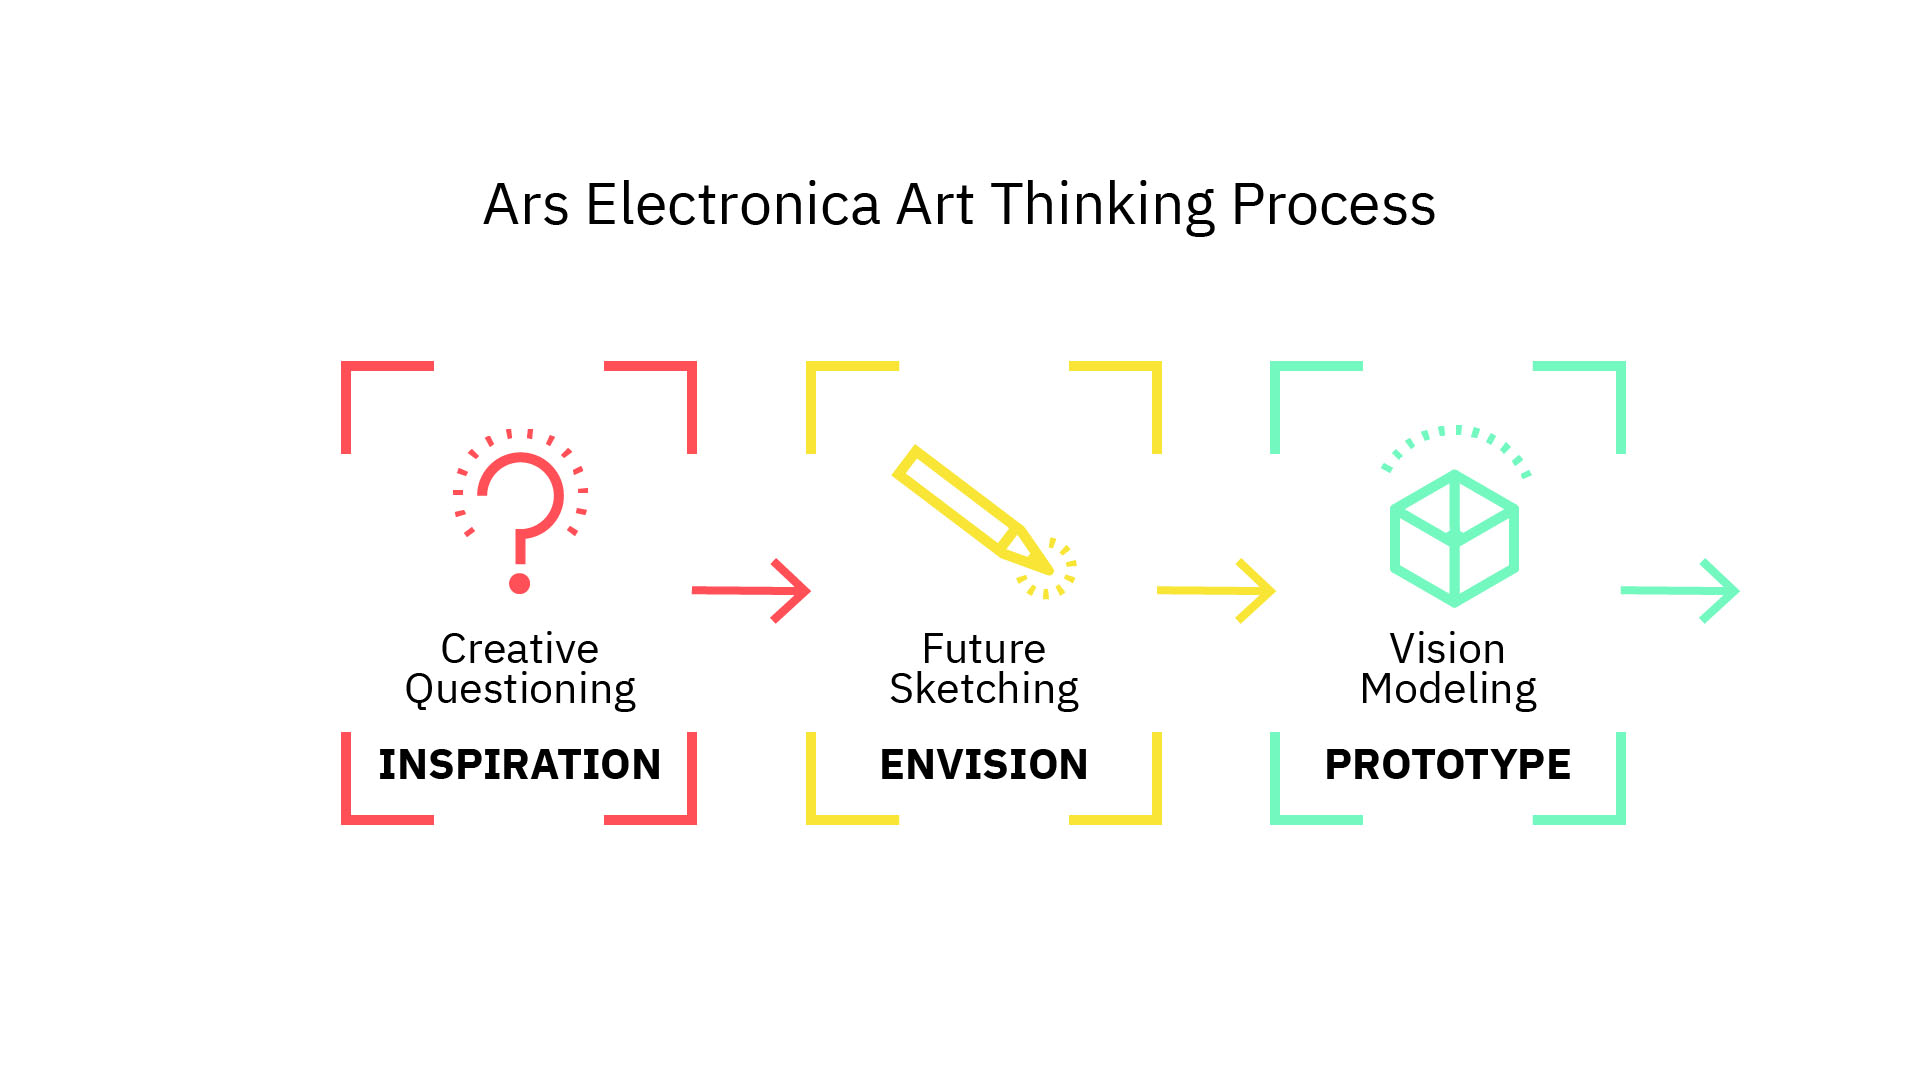 The Three Stages of the Art Thinking Process